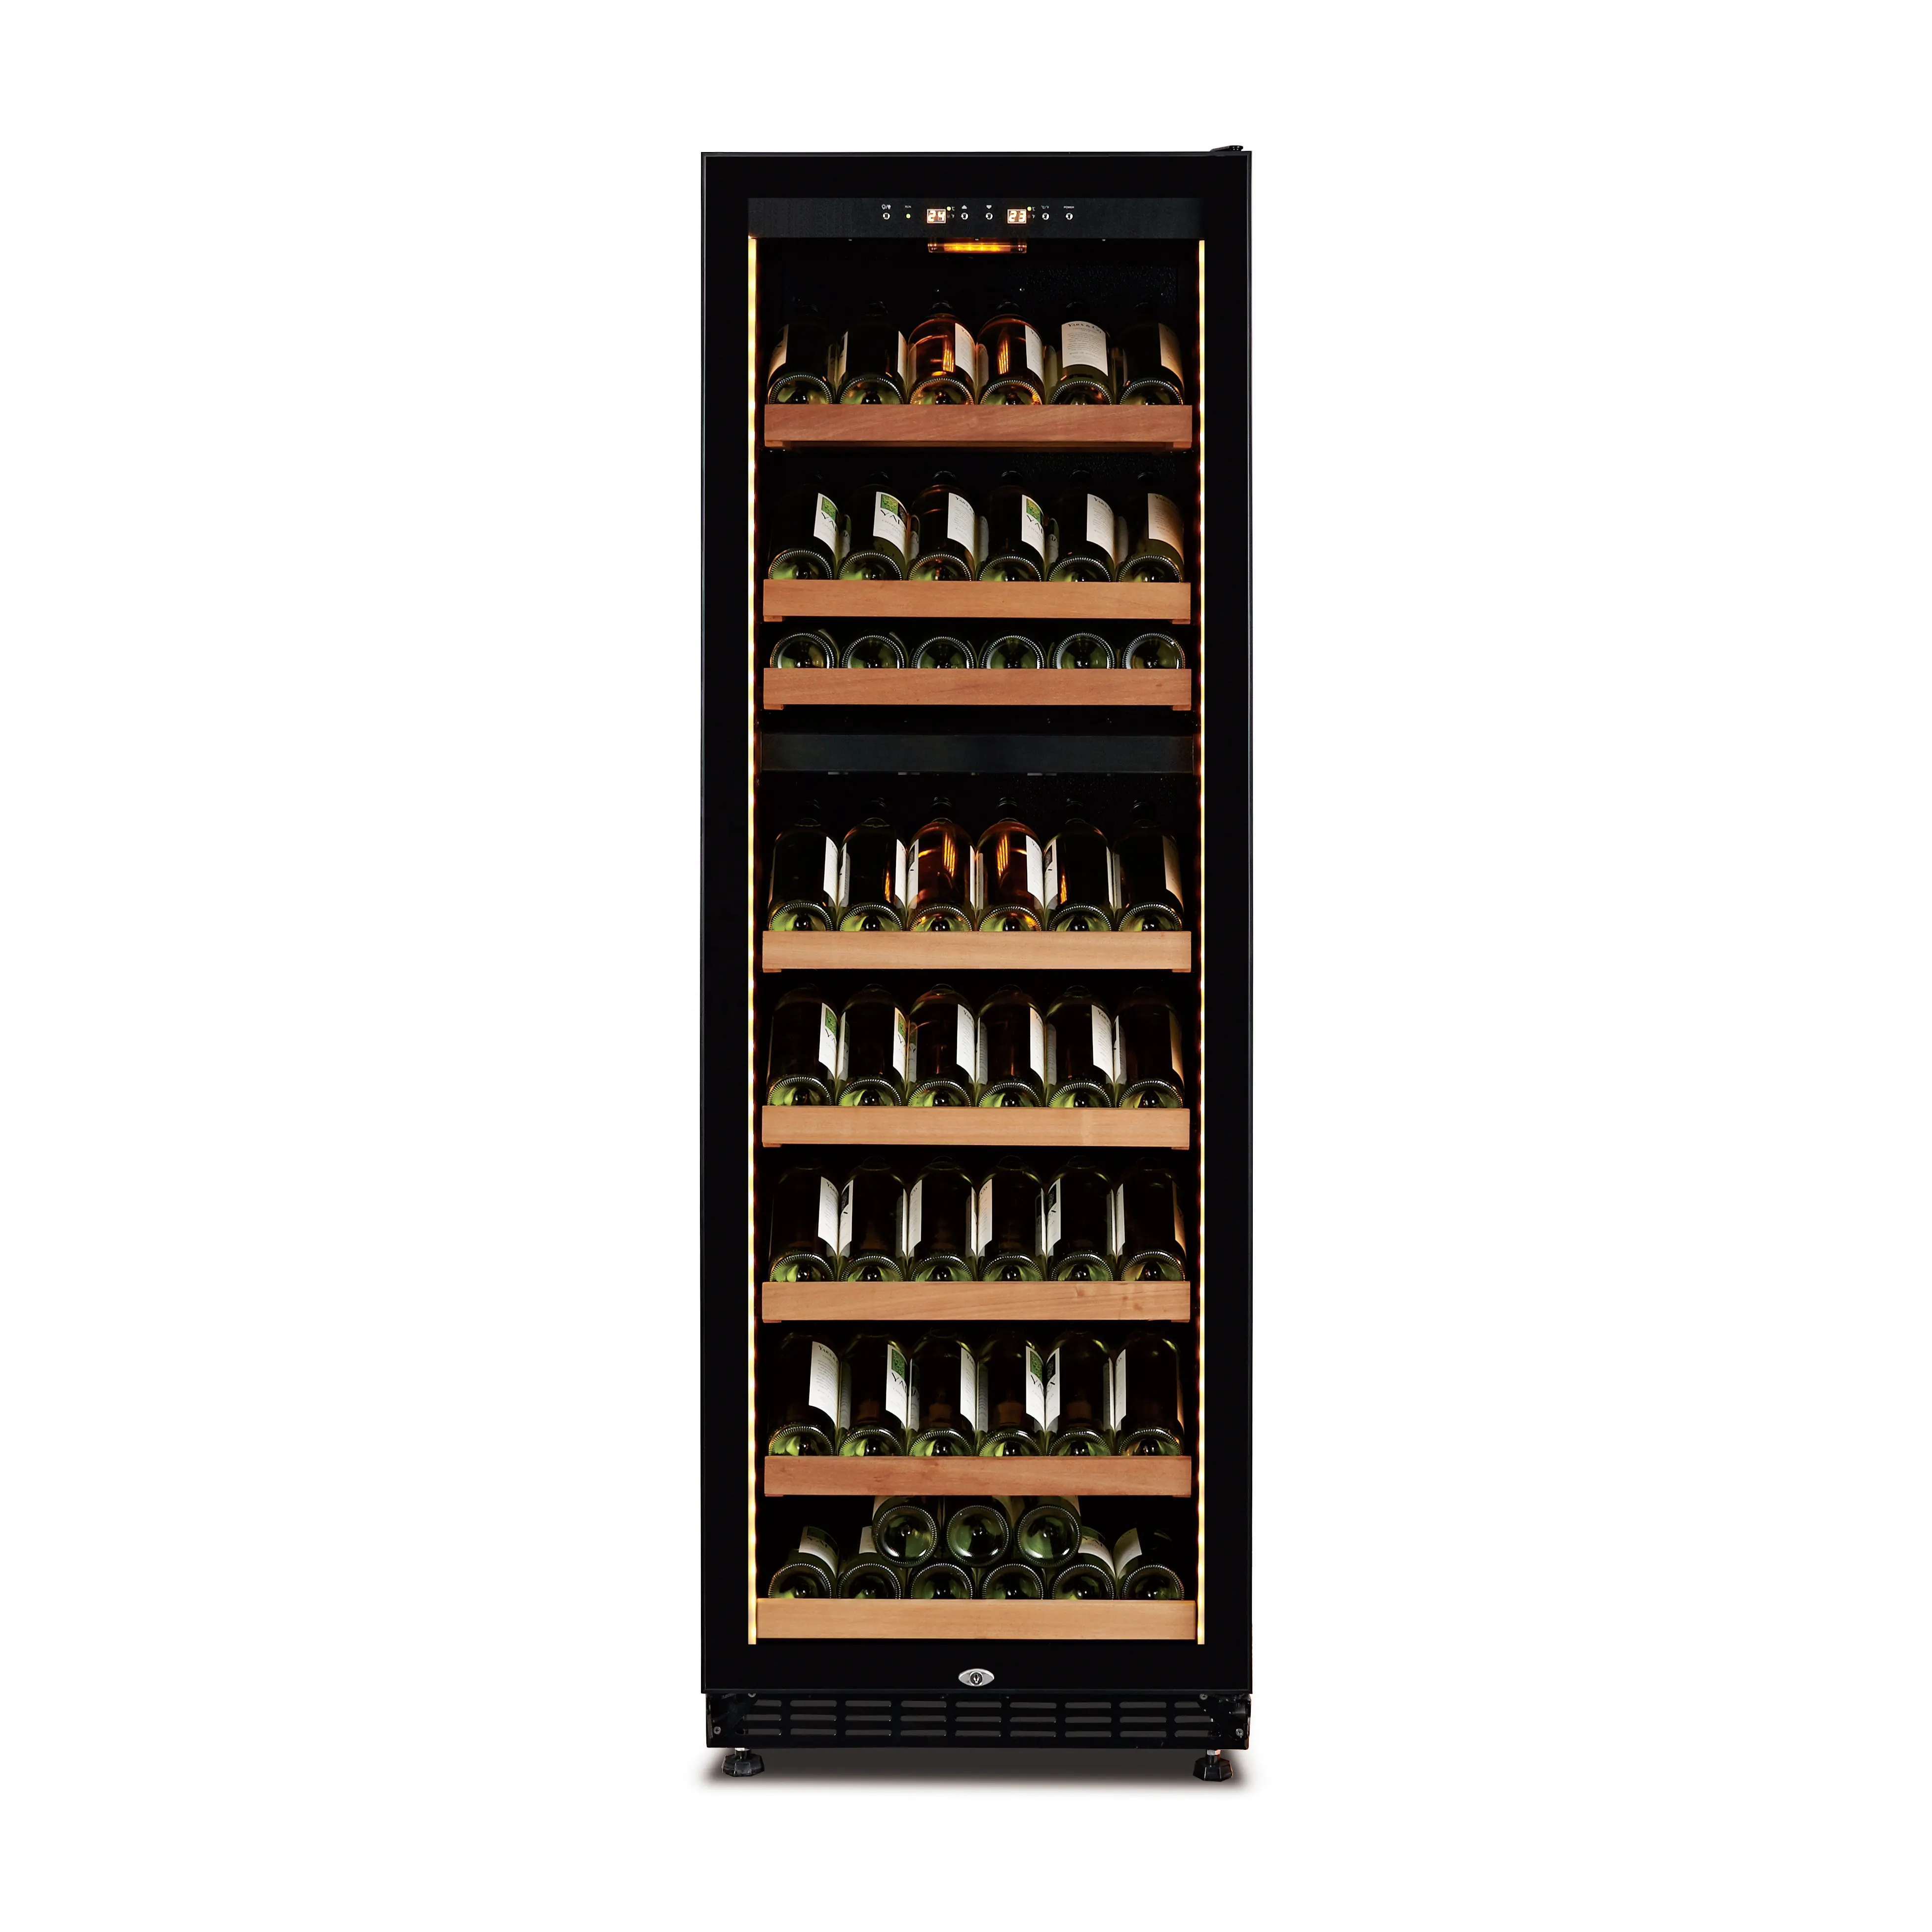 Luxury Wine bottle cooler with Display sapele shelves use for commercial